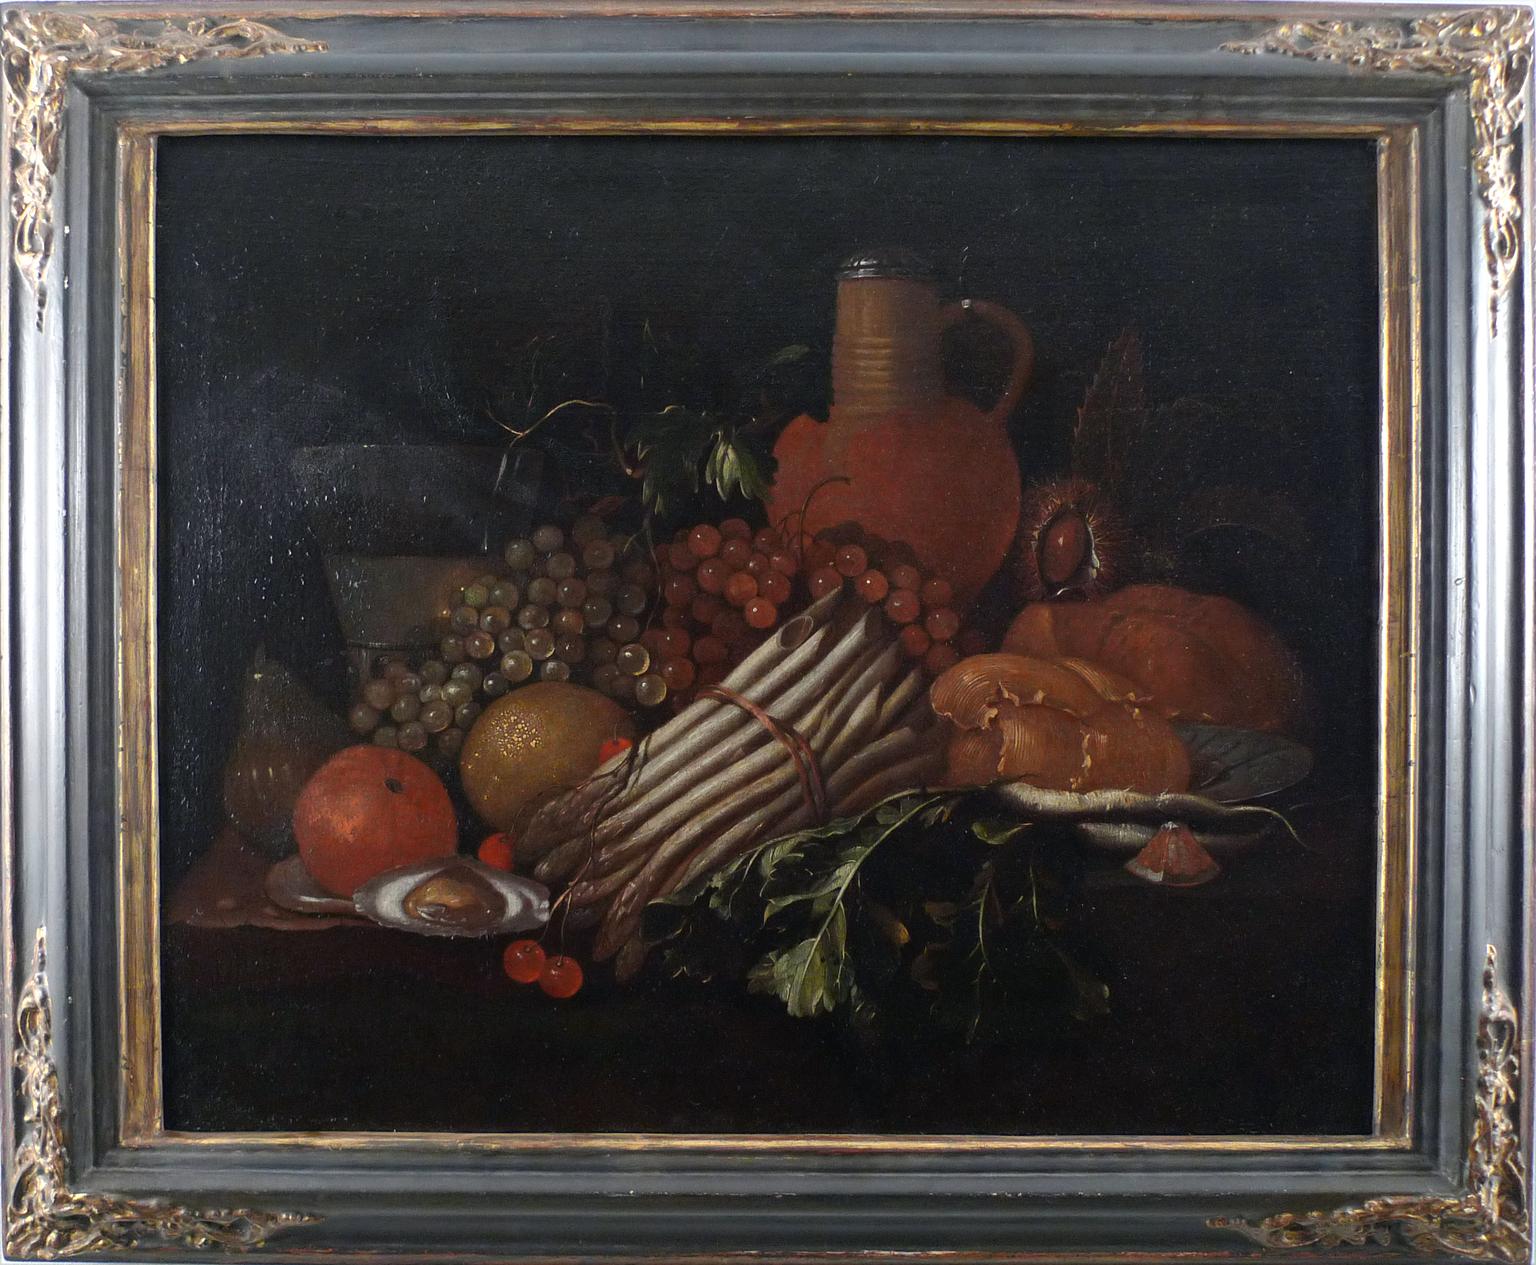 "Still Life with Fruits", 17th Century Oil on Canvas by Flemish School